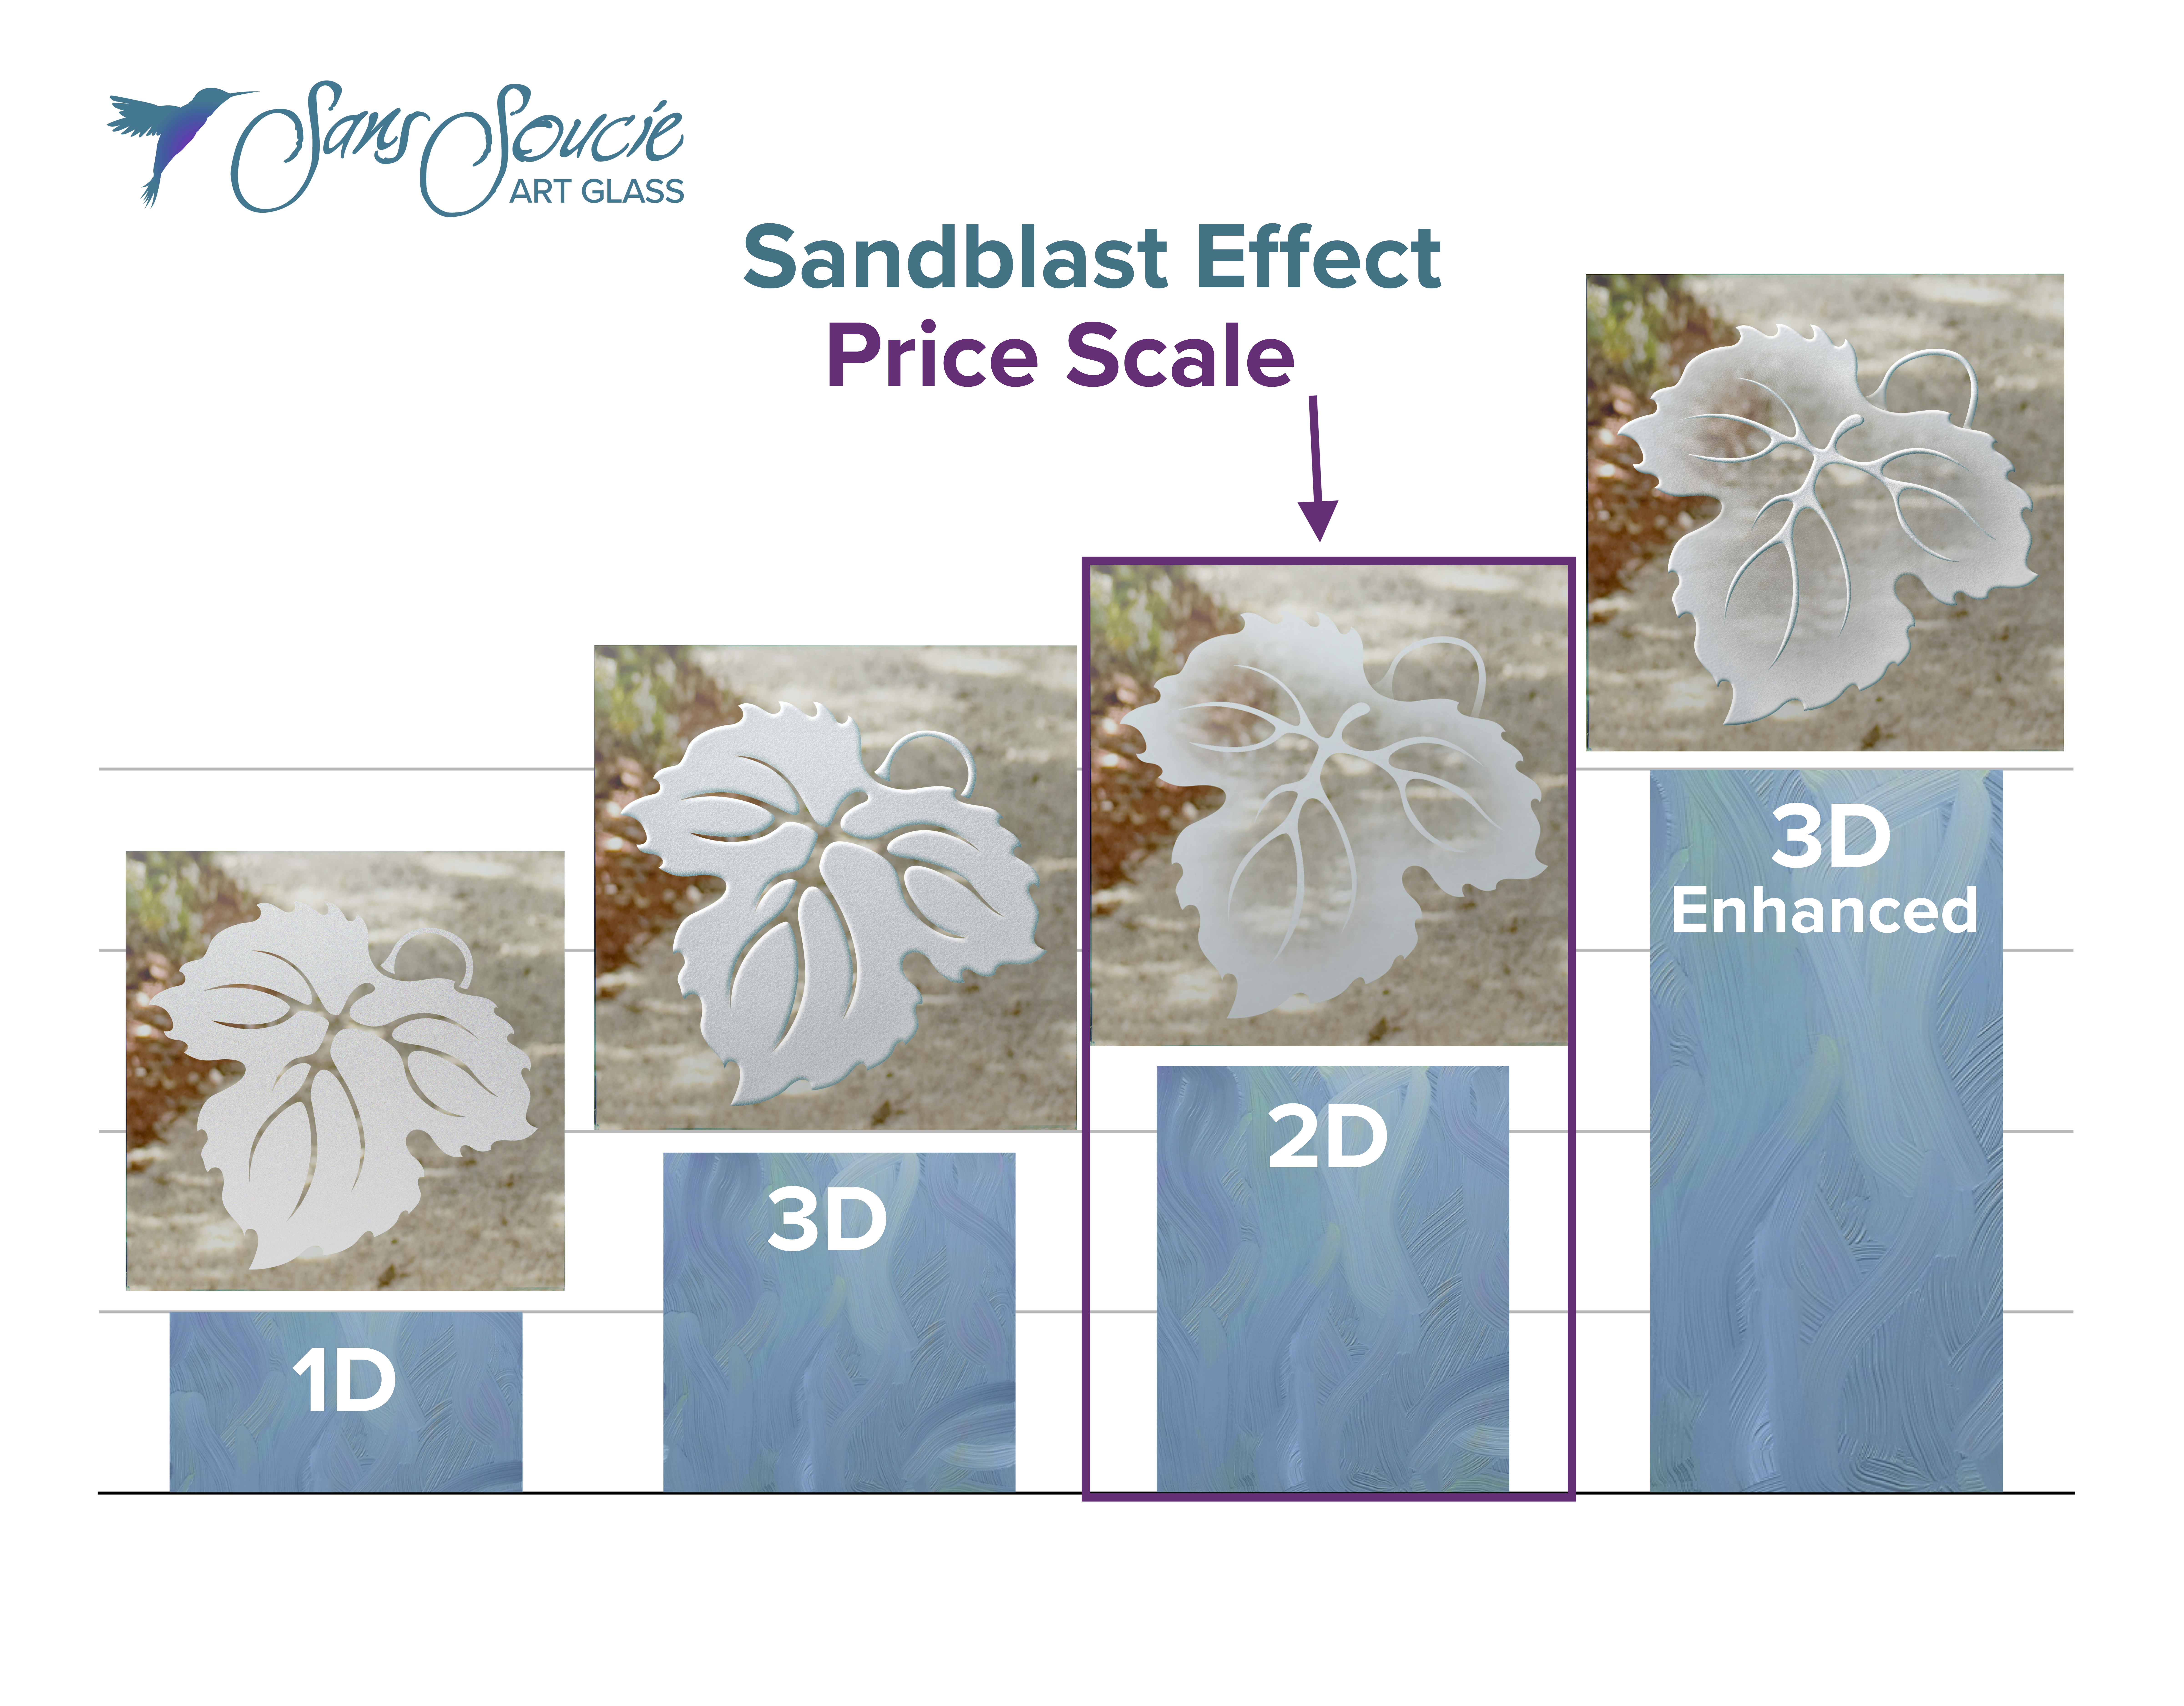 frosted glass price scale highlighting 2D effect by sans soucie art glass